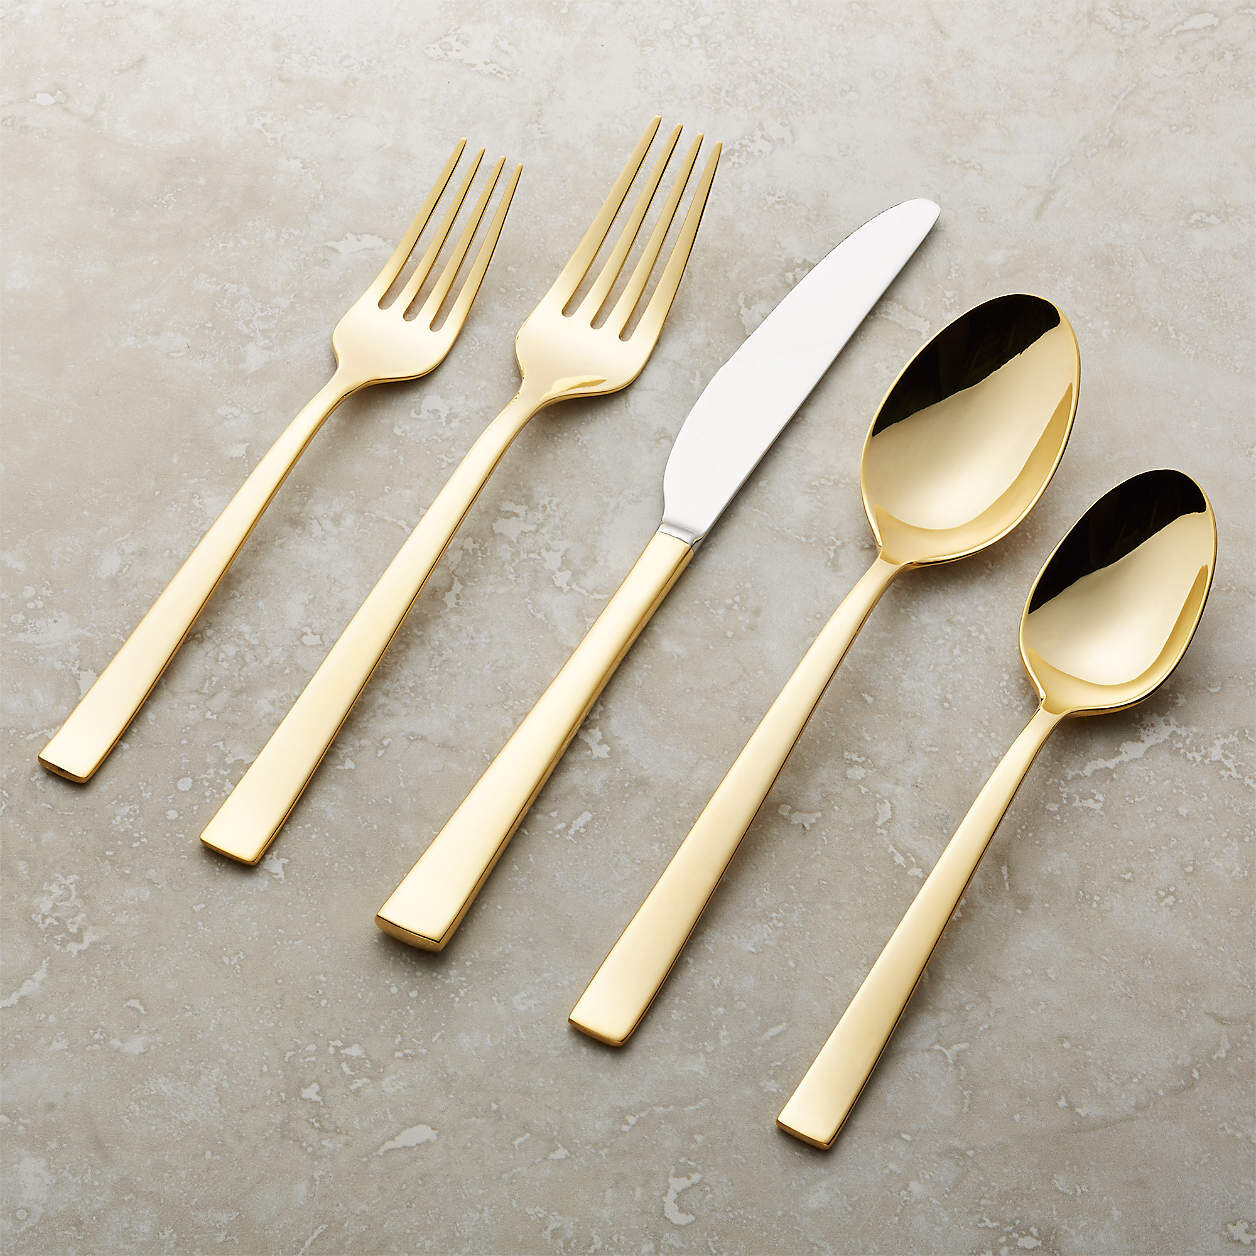 emory-gold-5-piece-place-setting.jpg